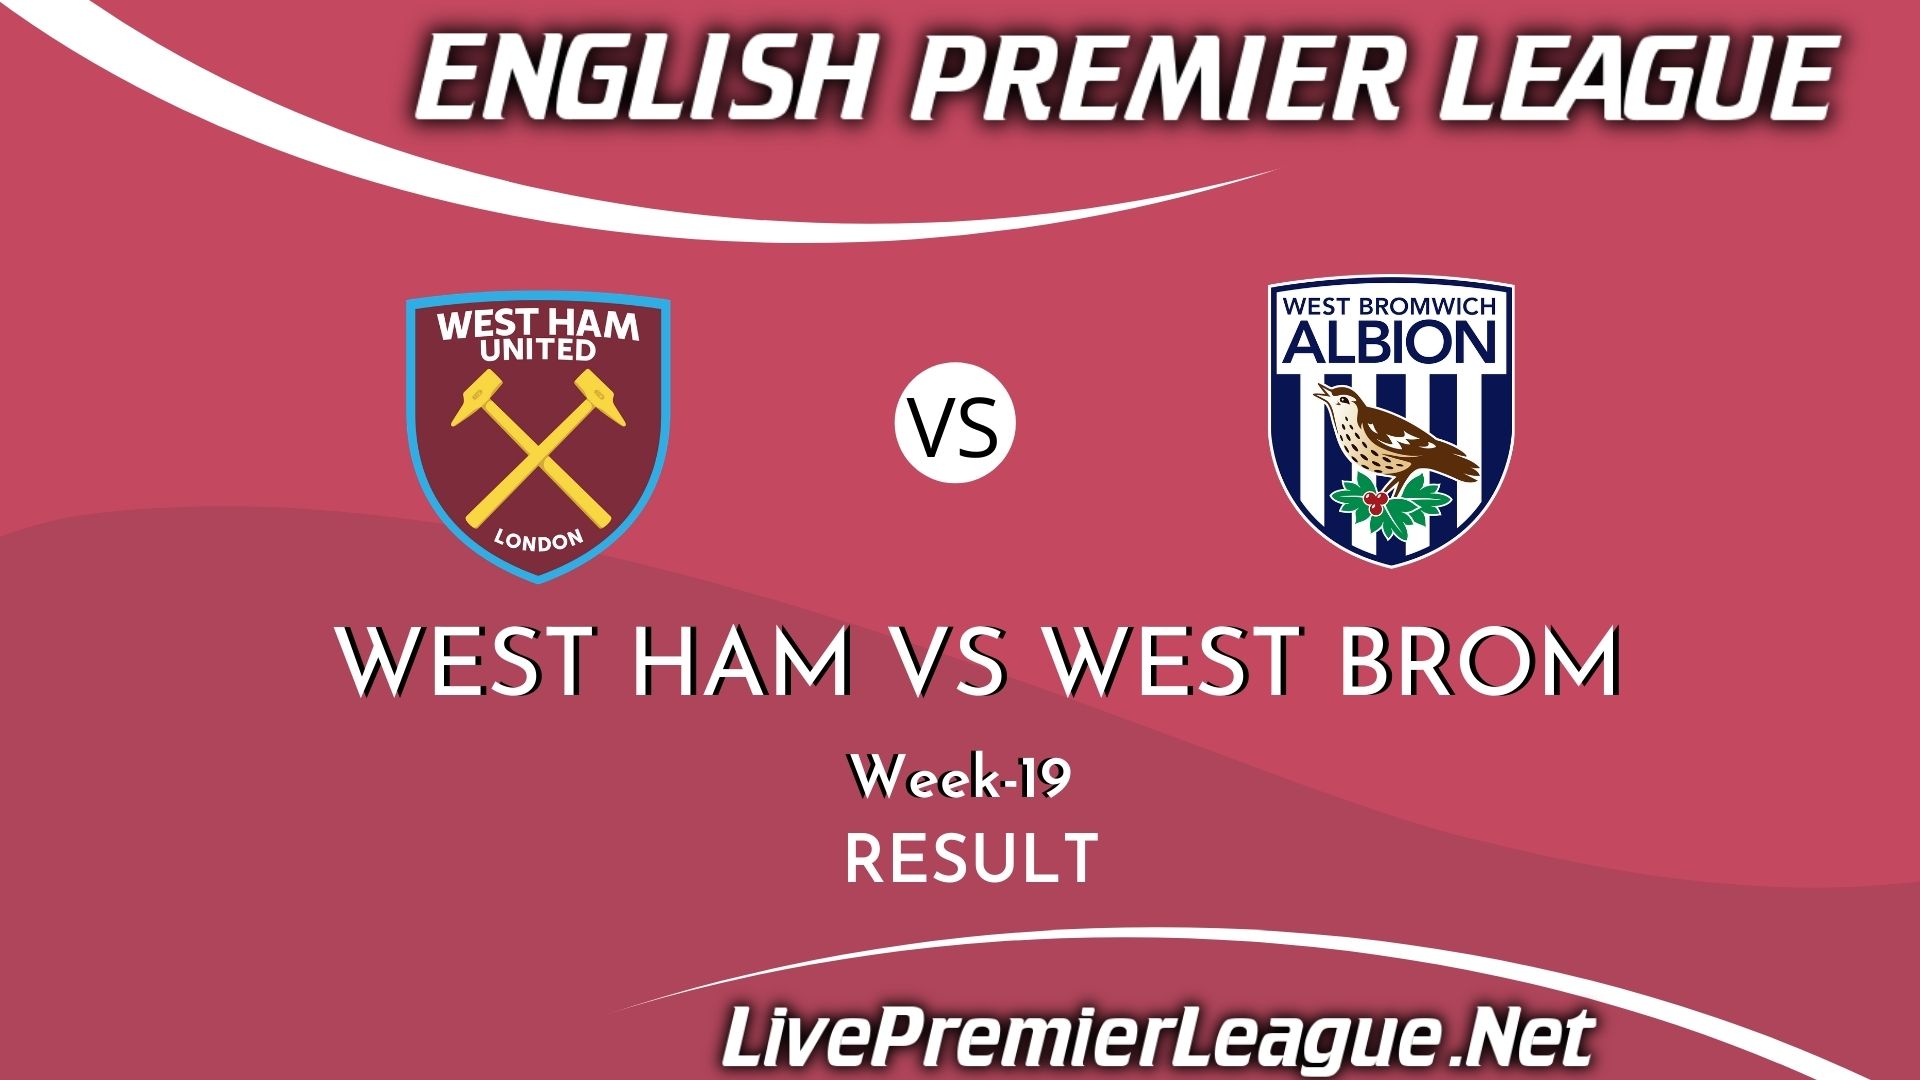 West Ham United Vs West Bromwich Albion | EPL Week 19 Result 2021